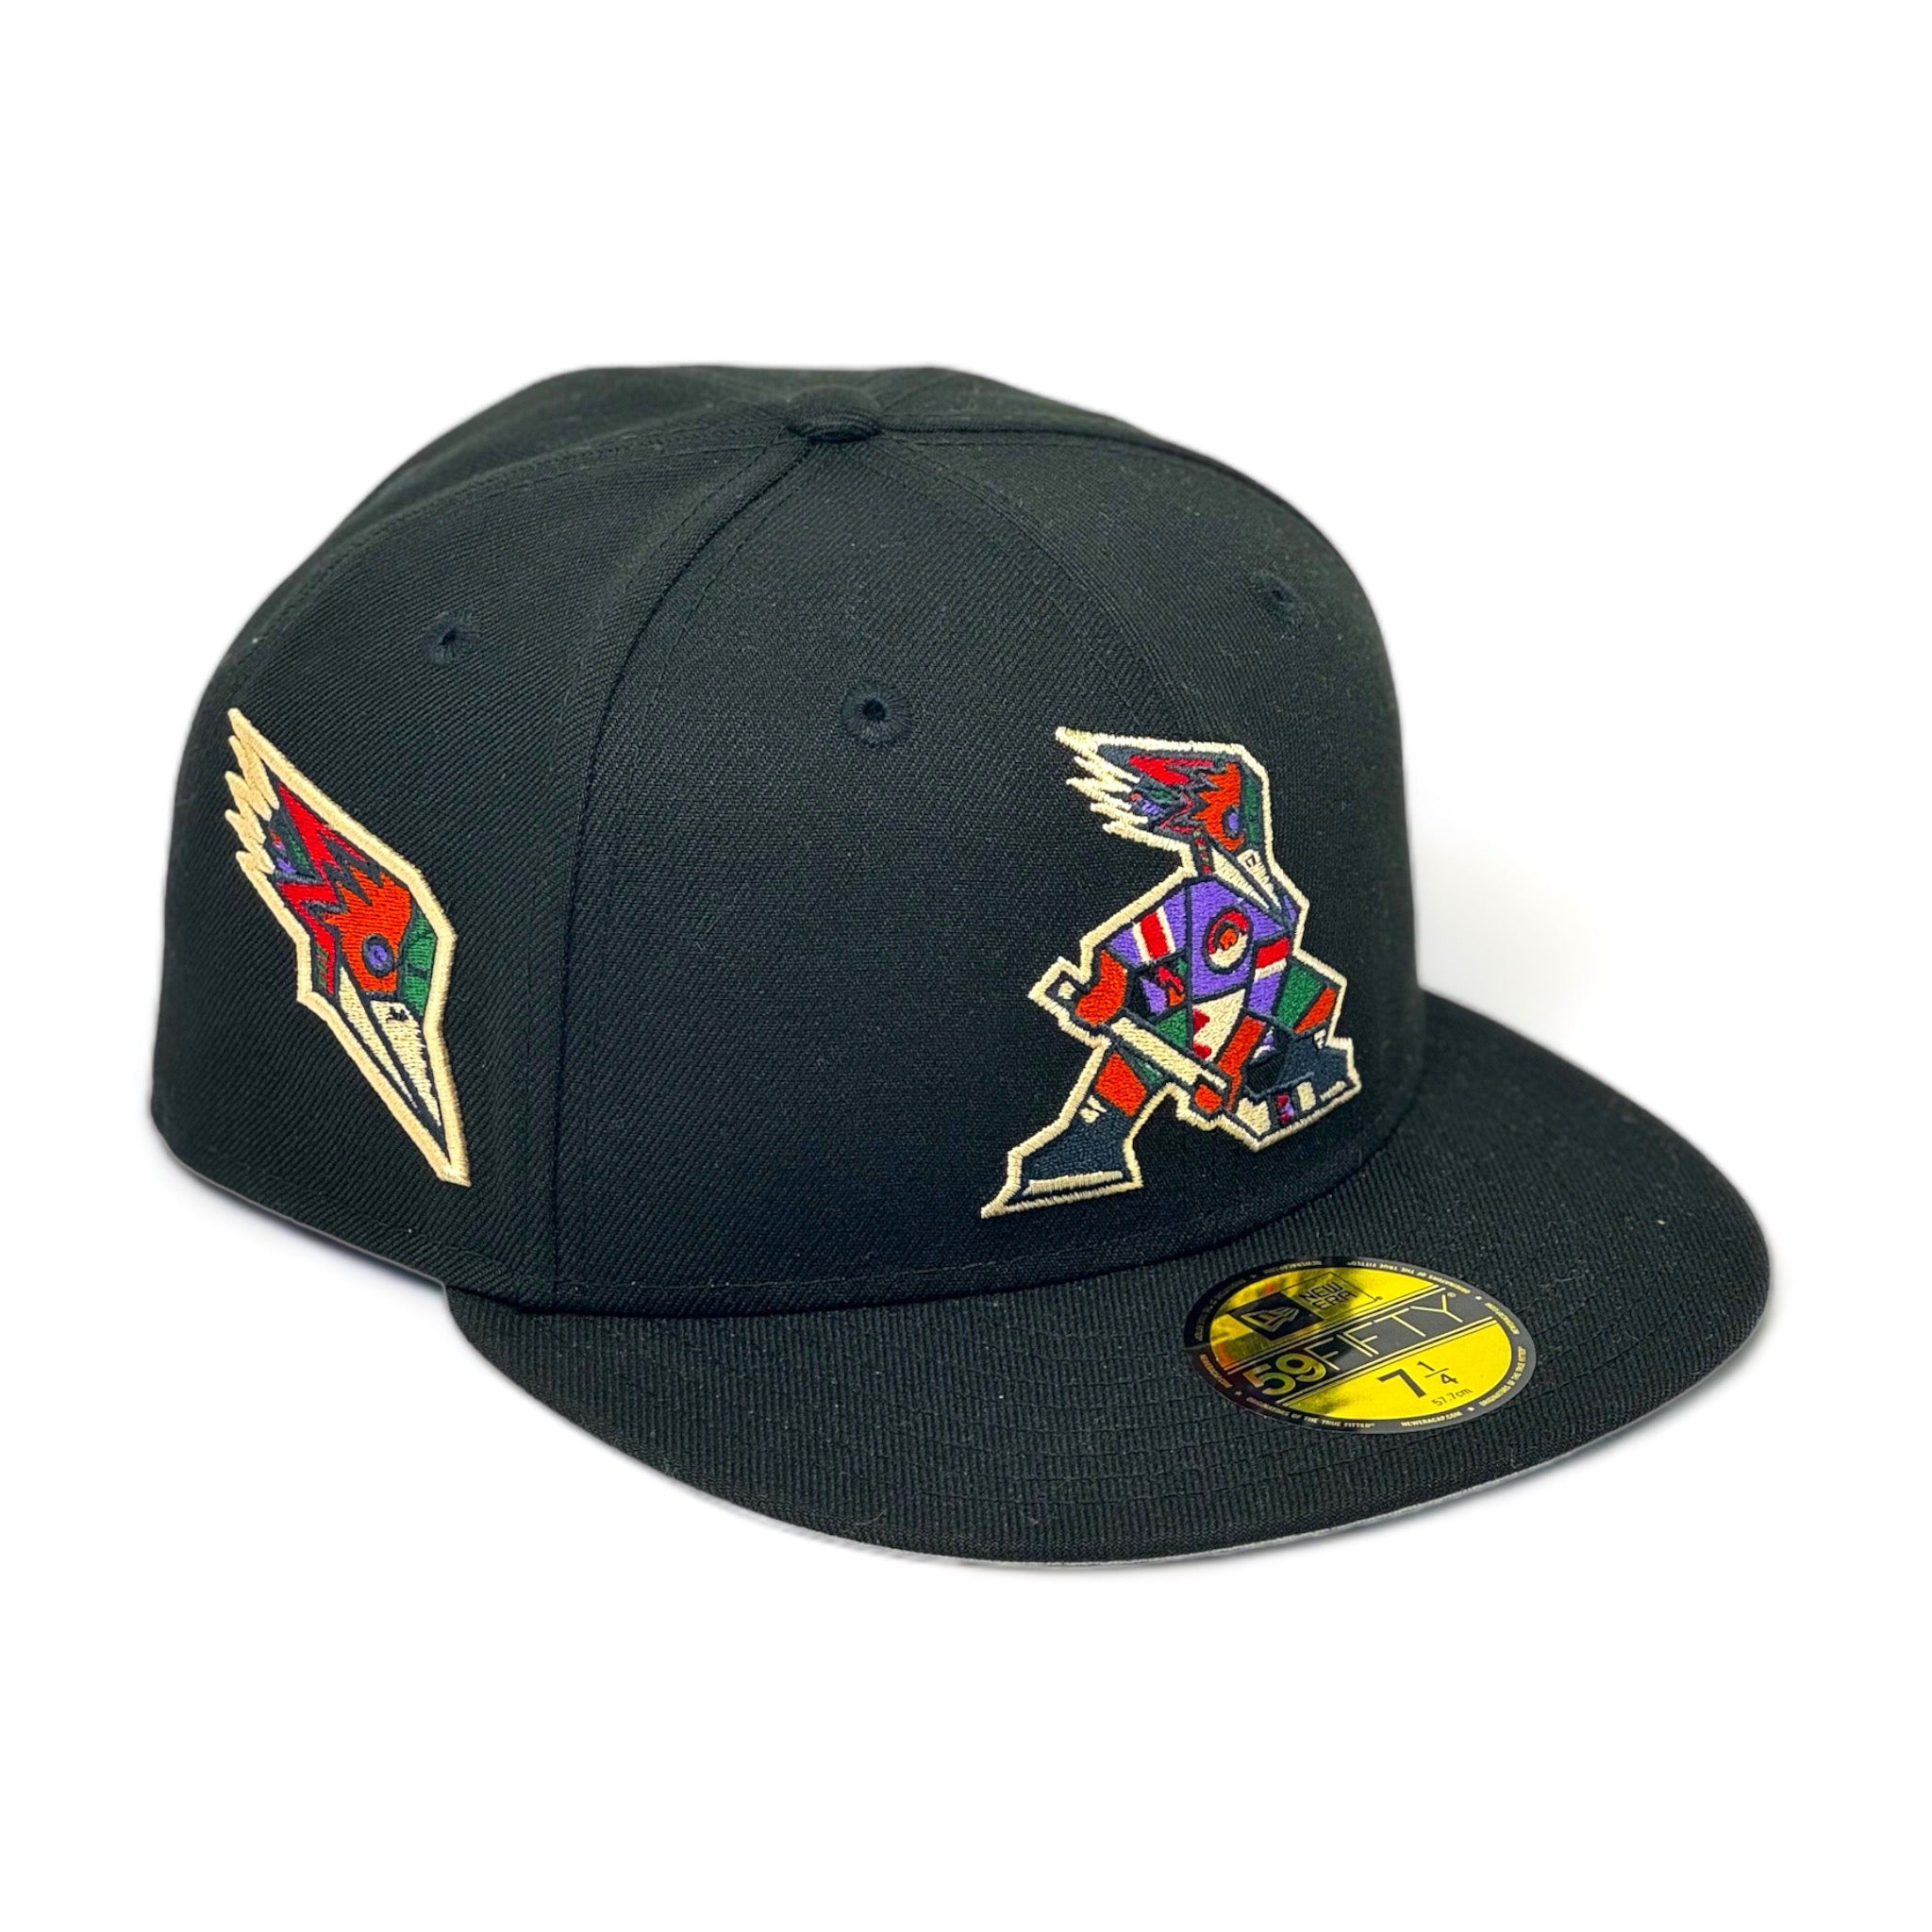 TUCSON ROADRUNNERS (BLACK) NEW ERA 59FIFTY FITTED